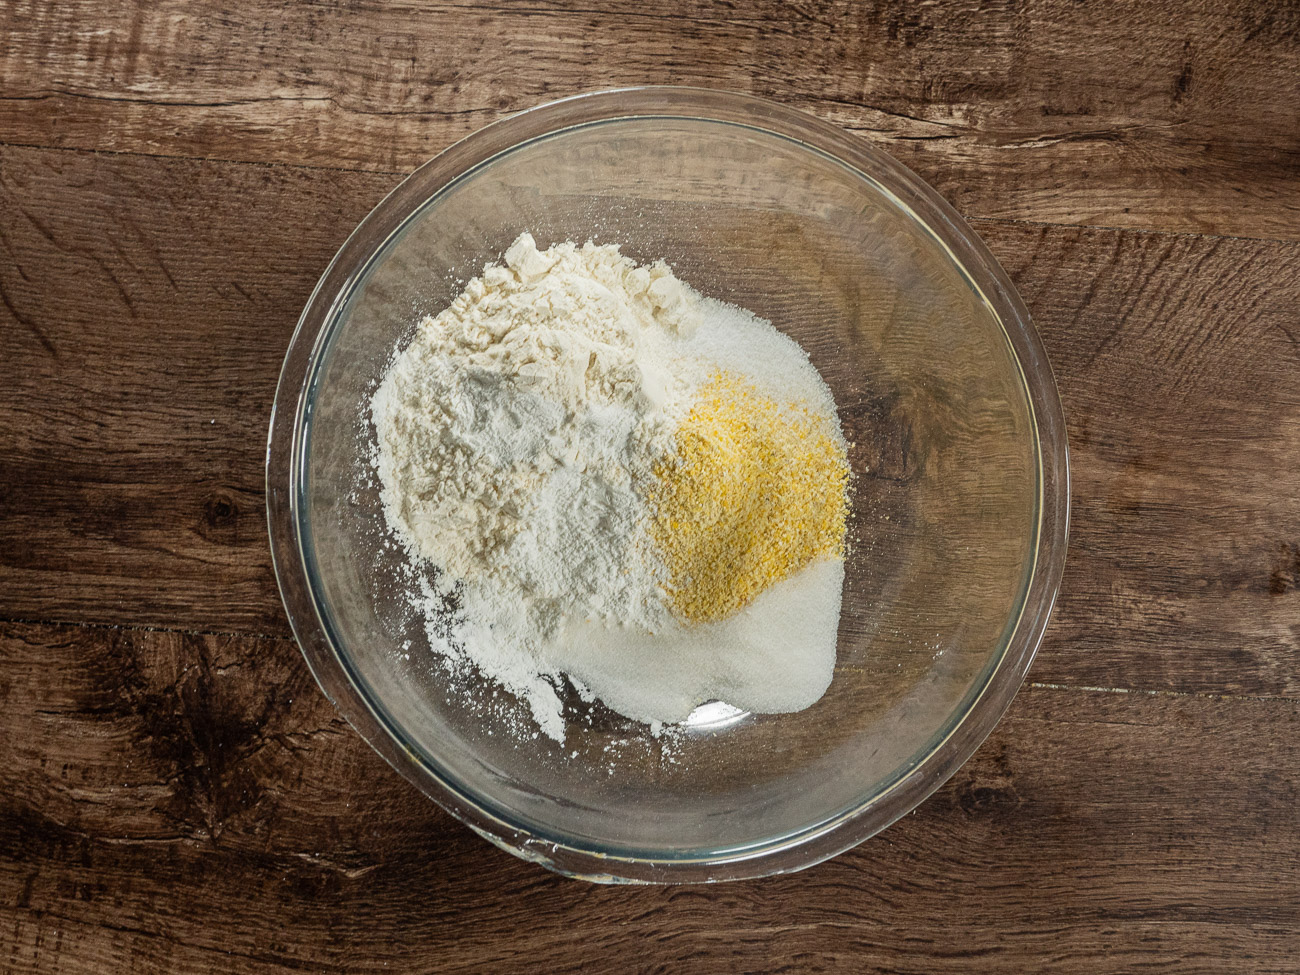 In a large bowl, whisk together cornmeal, flour, baking powder, salt, and sugar.